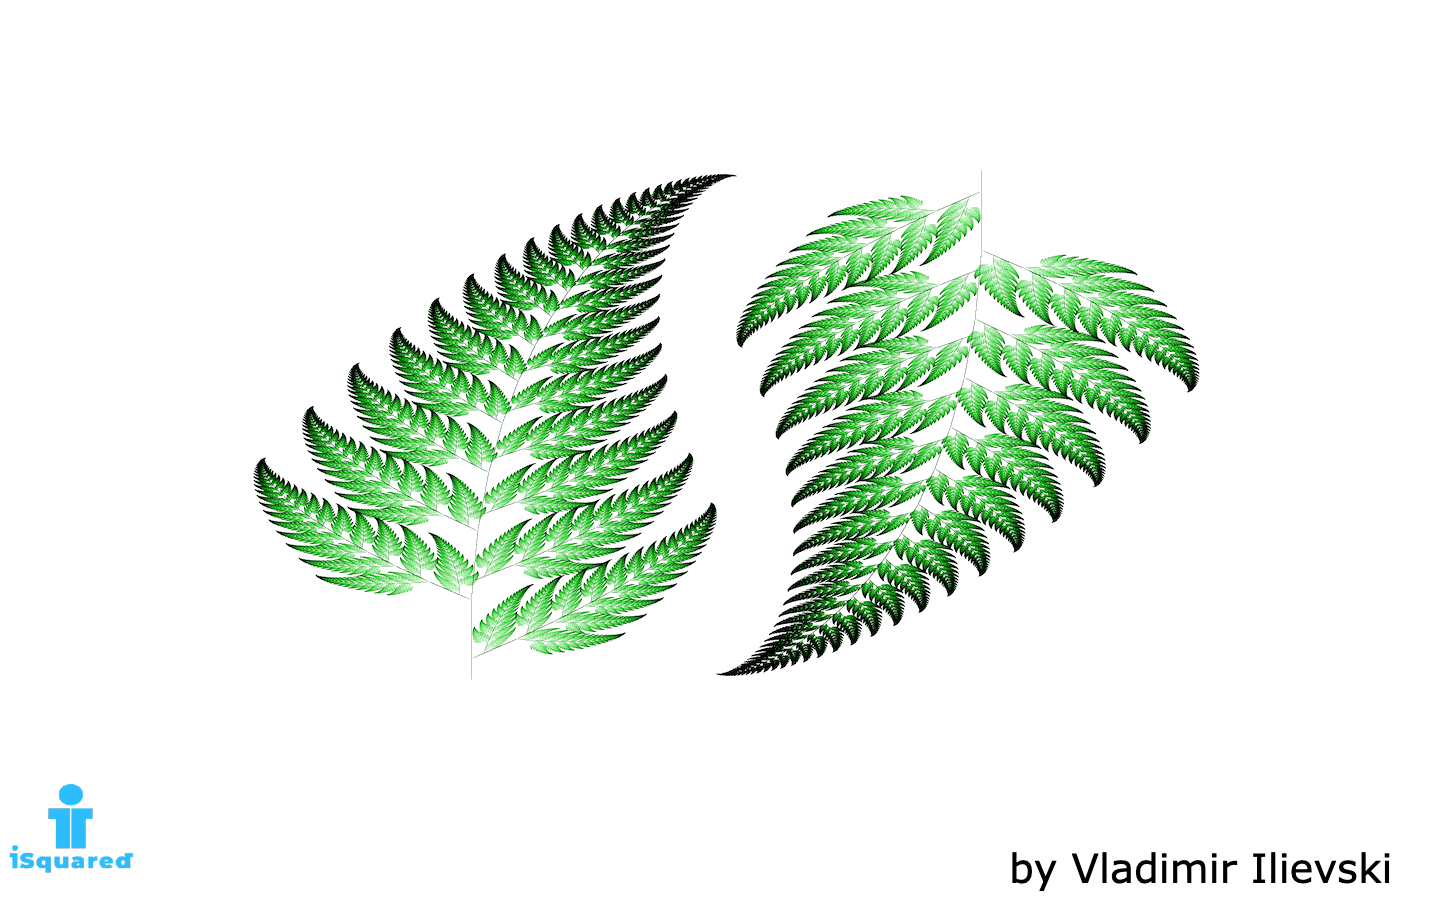 The Barnsley Fern: Ferns Seen as Fractals (not only as plants)